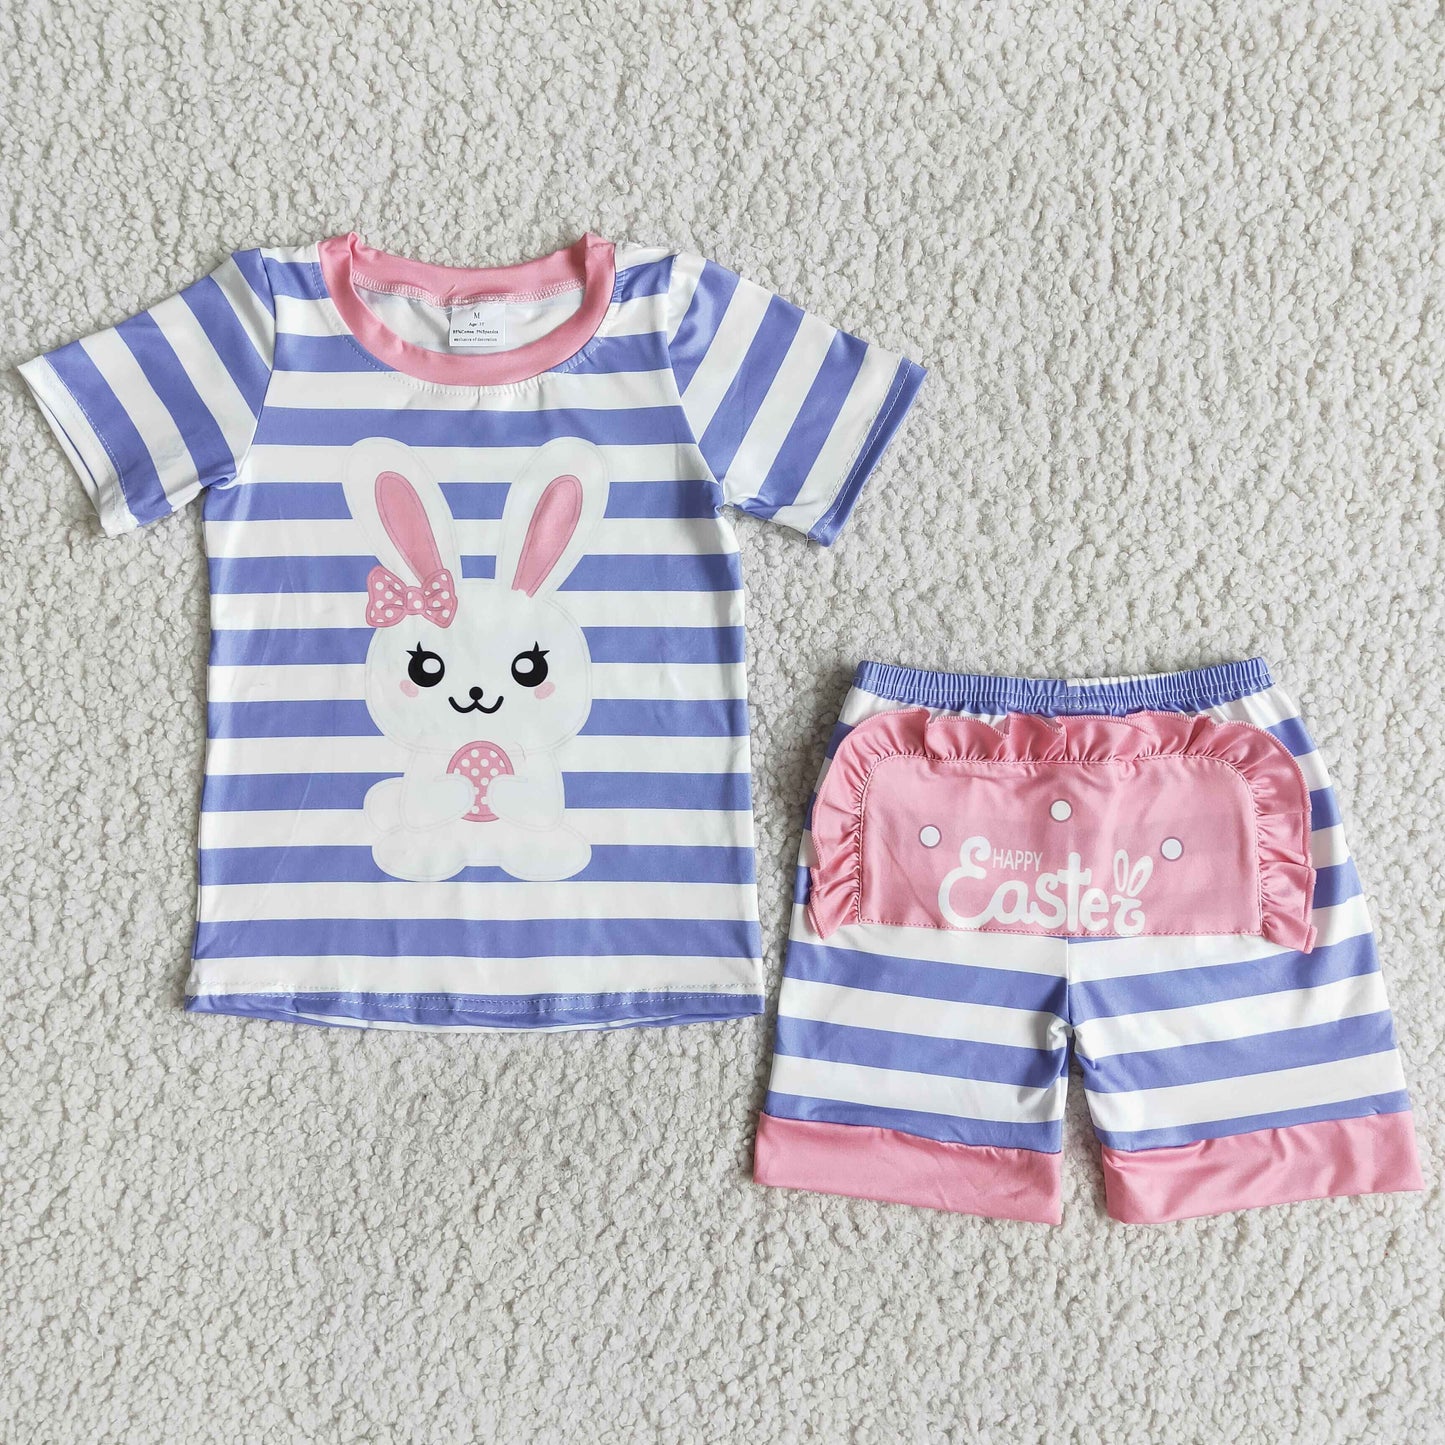 Easter Blue Striped Print Rabbits Girls Outfits